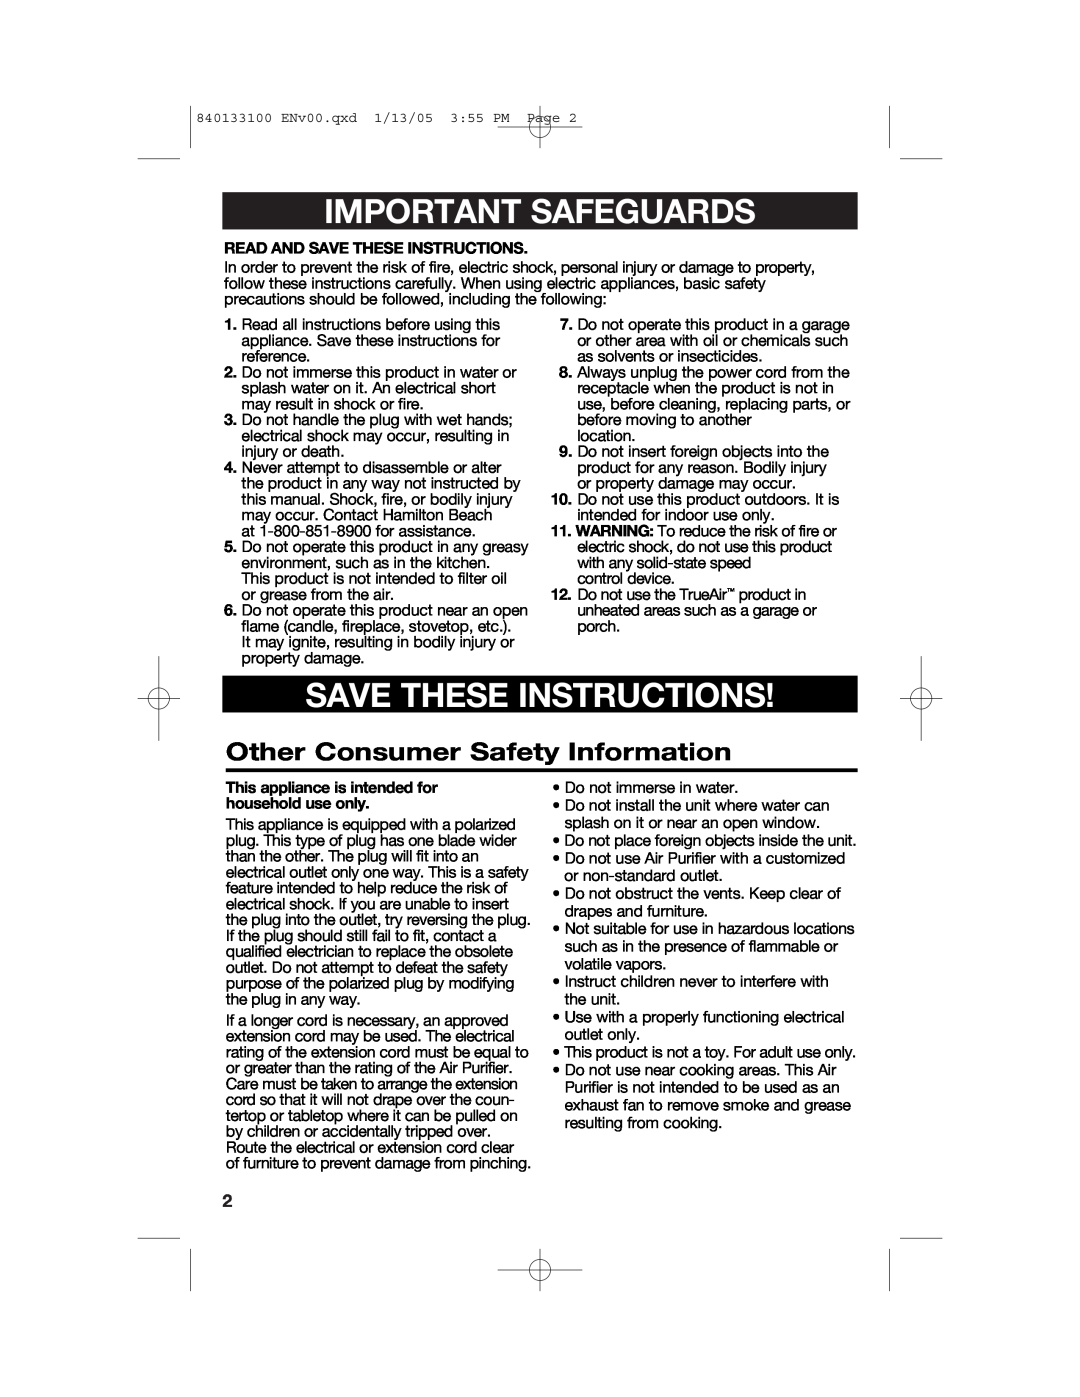 Hamilton Beach HEPA manual Important Safeguards, Save These Instructions, Other Consumer Safety Information 